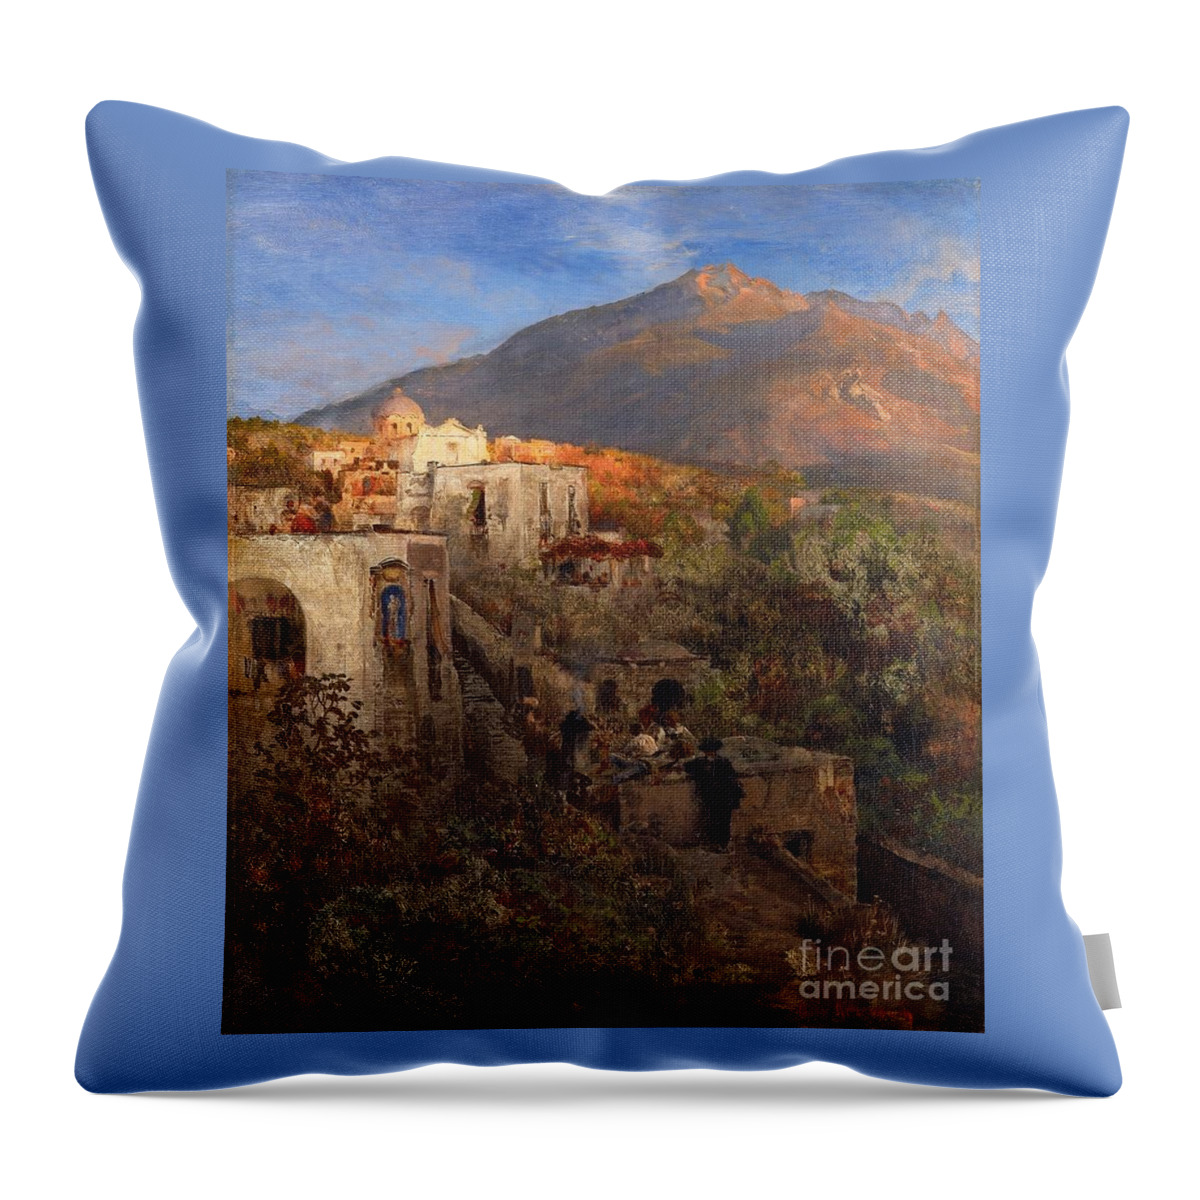 Oswald Achenbach Throw Pillow featuring the painting Evening In Ischia With View On The Monte Epomeo by MotionAge Designs